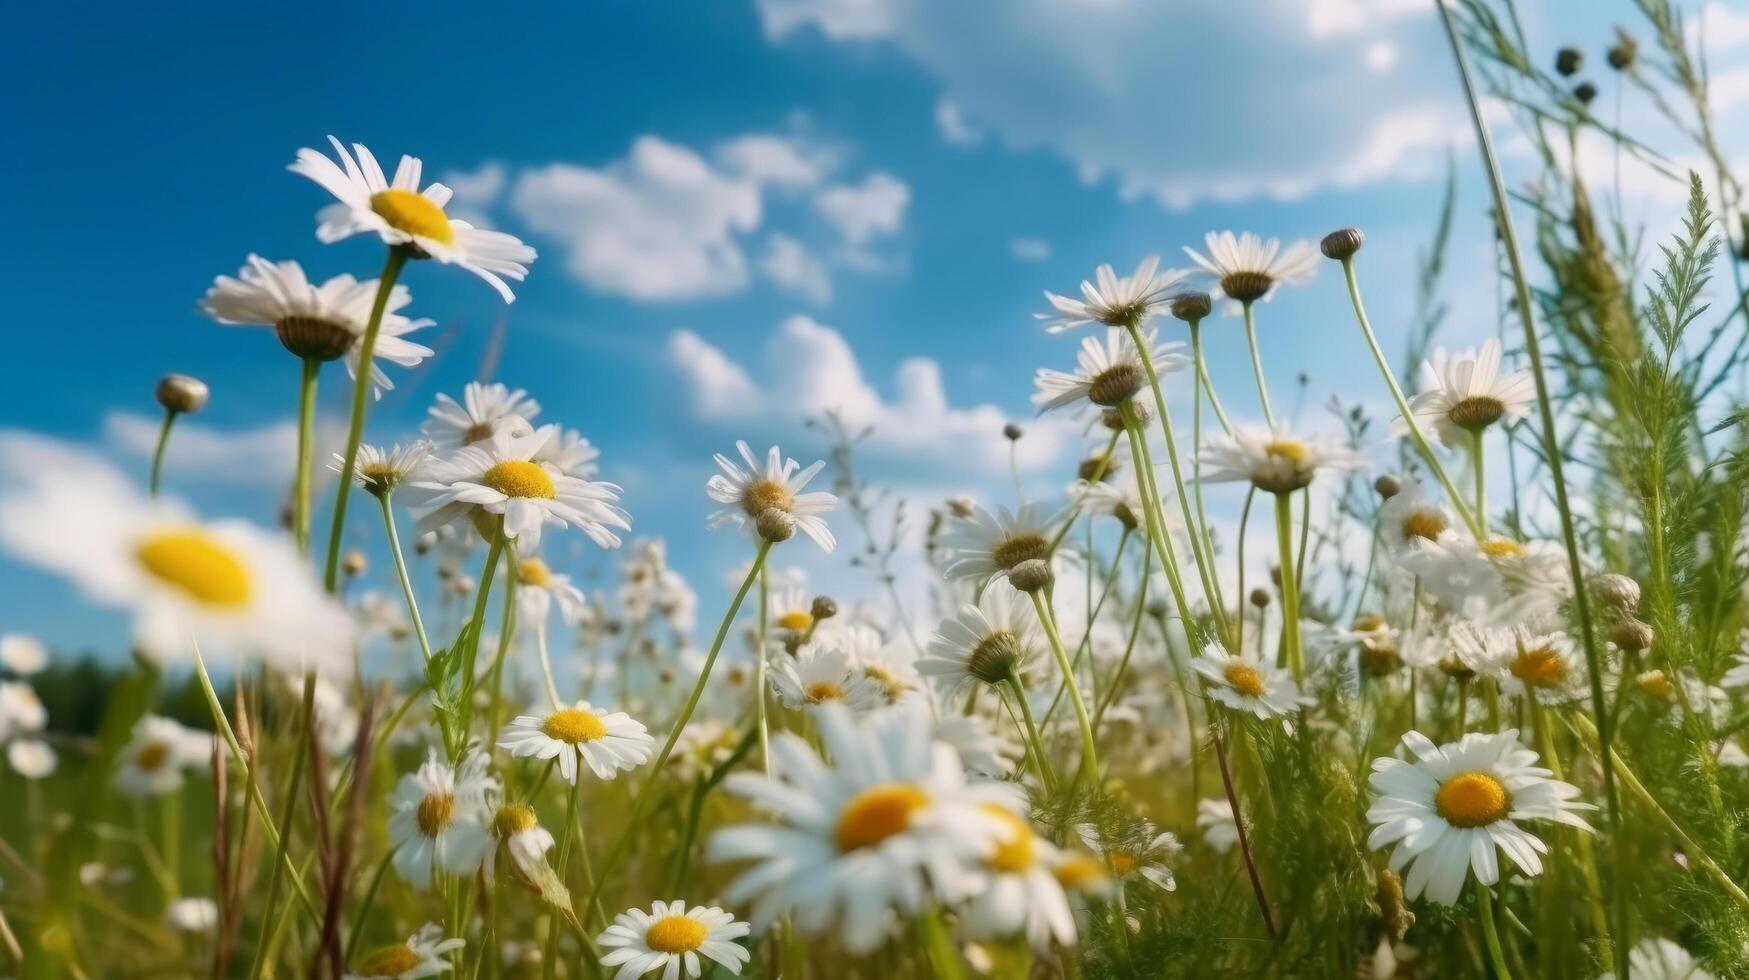 Summer field with daisy flowers. Illustration photo